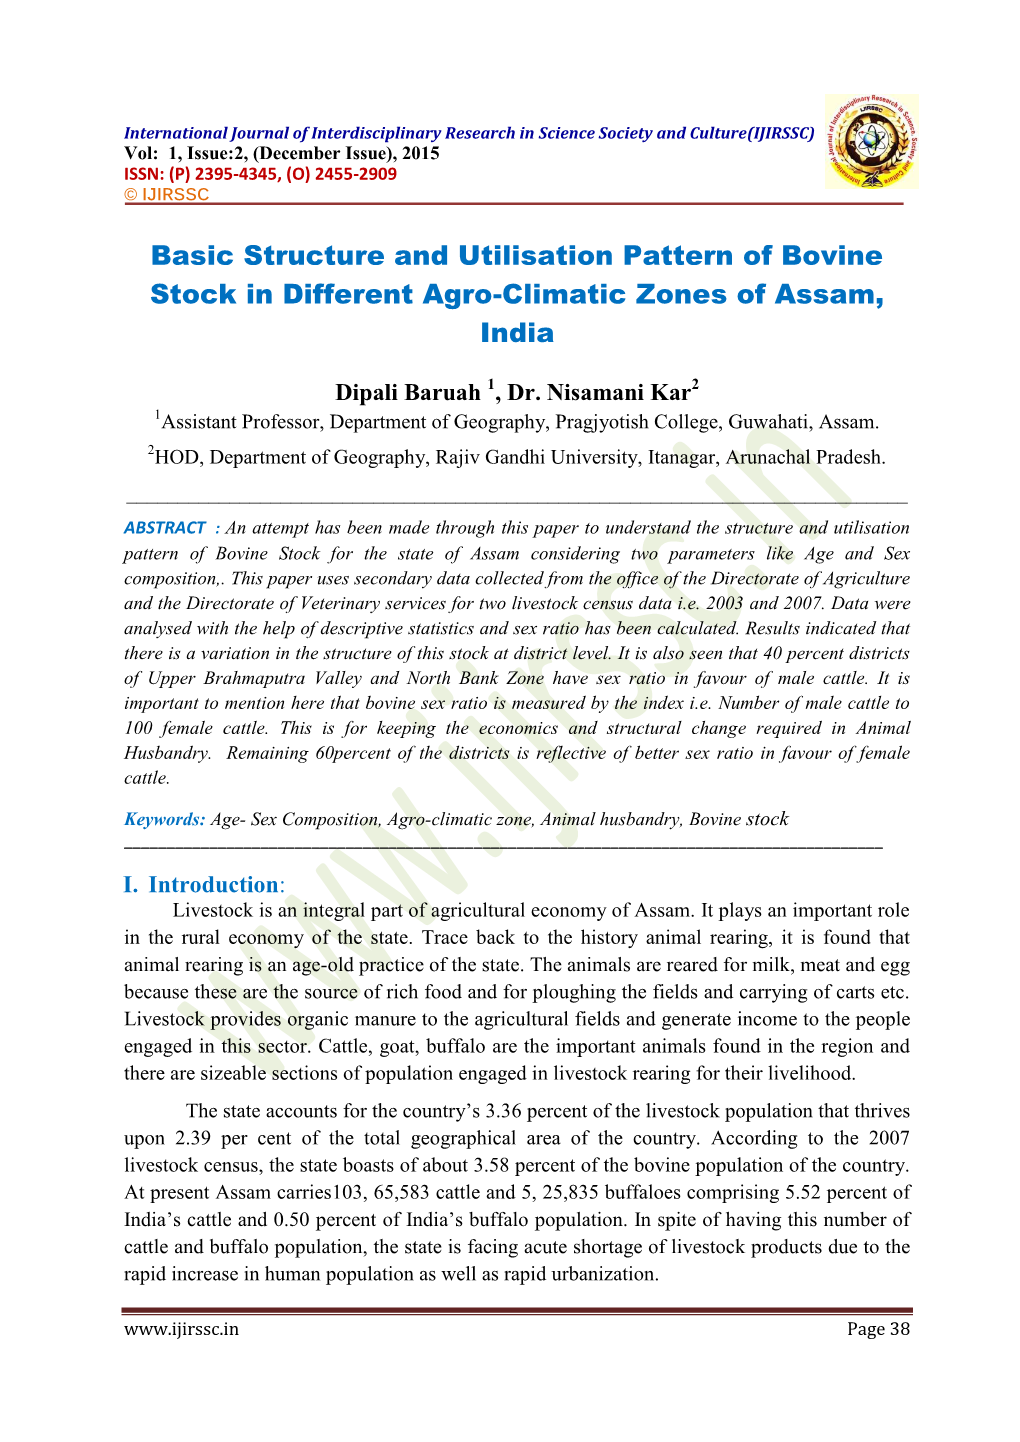 Basic Structure and Utilisation Pattern of Bovine Stock in Different Agro-Climatic Zones of Assam, India